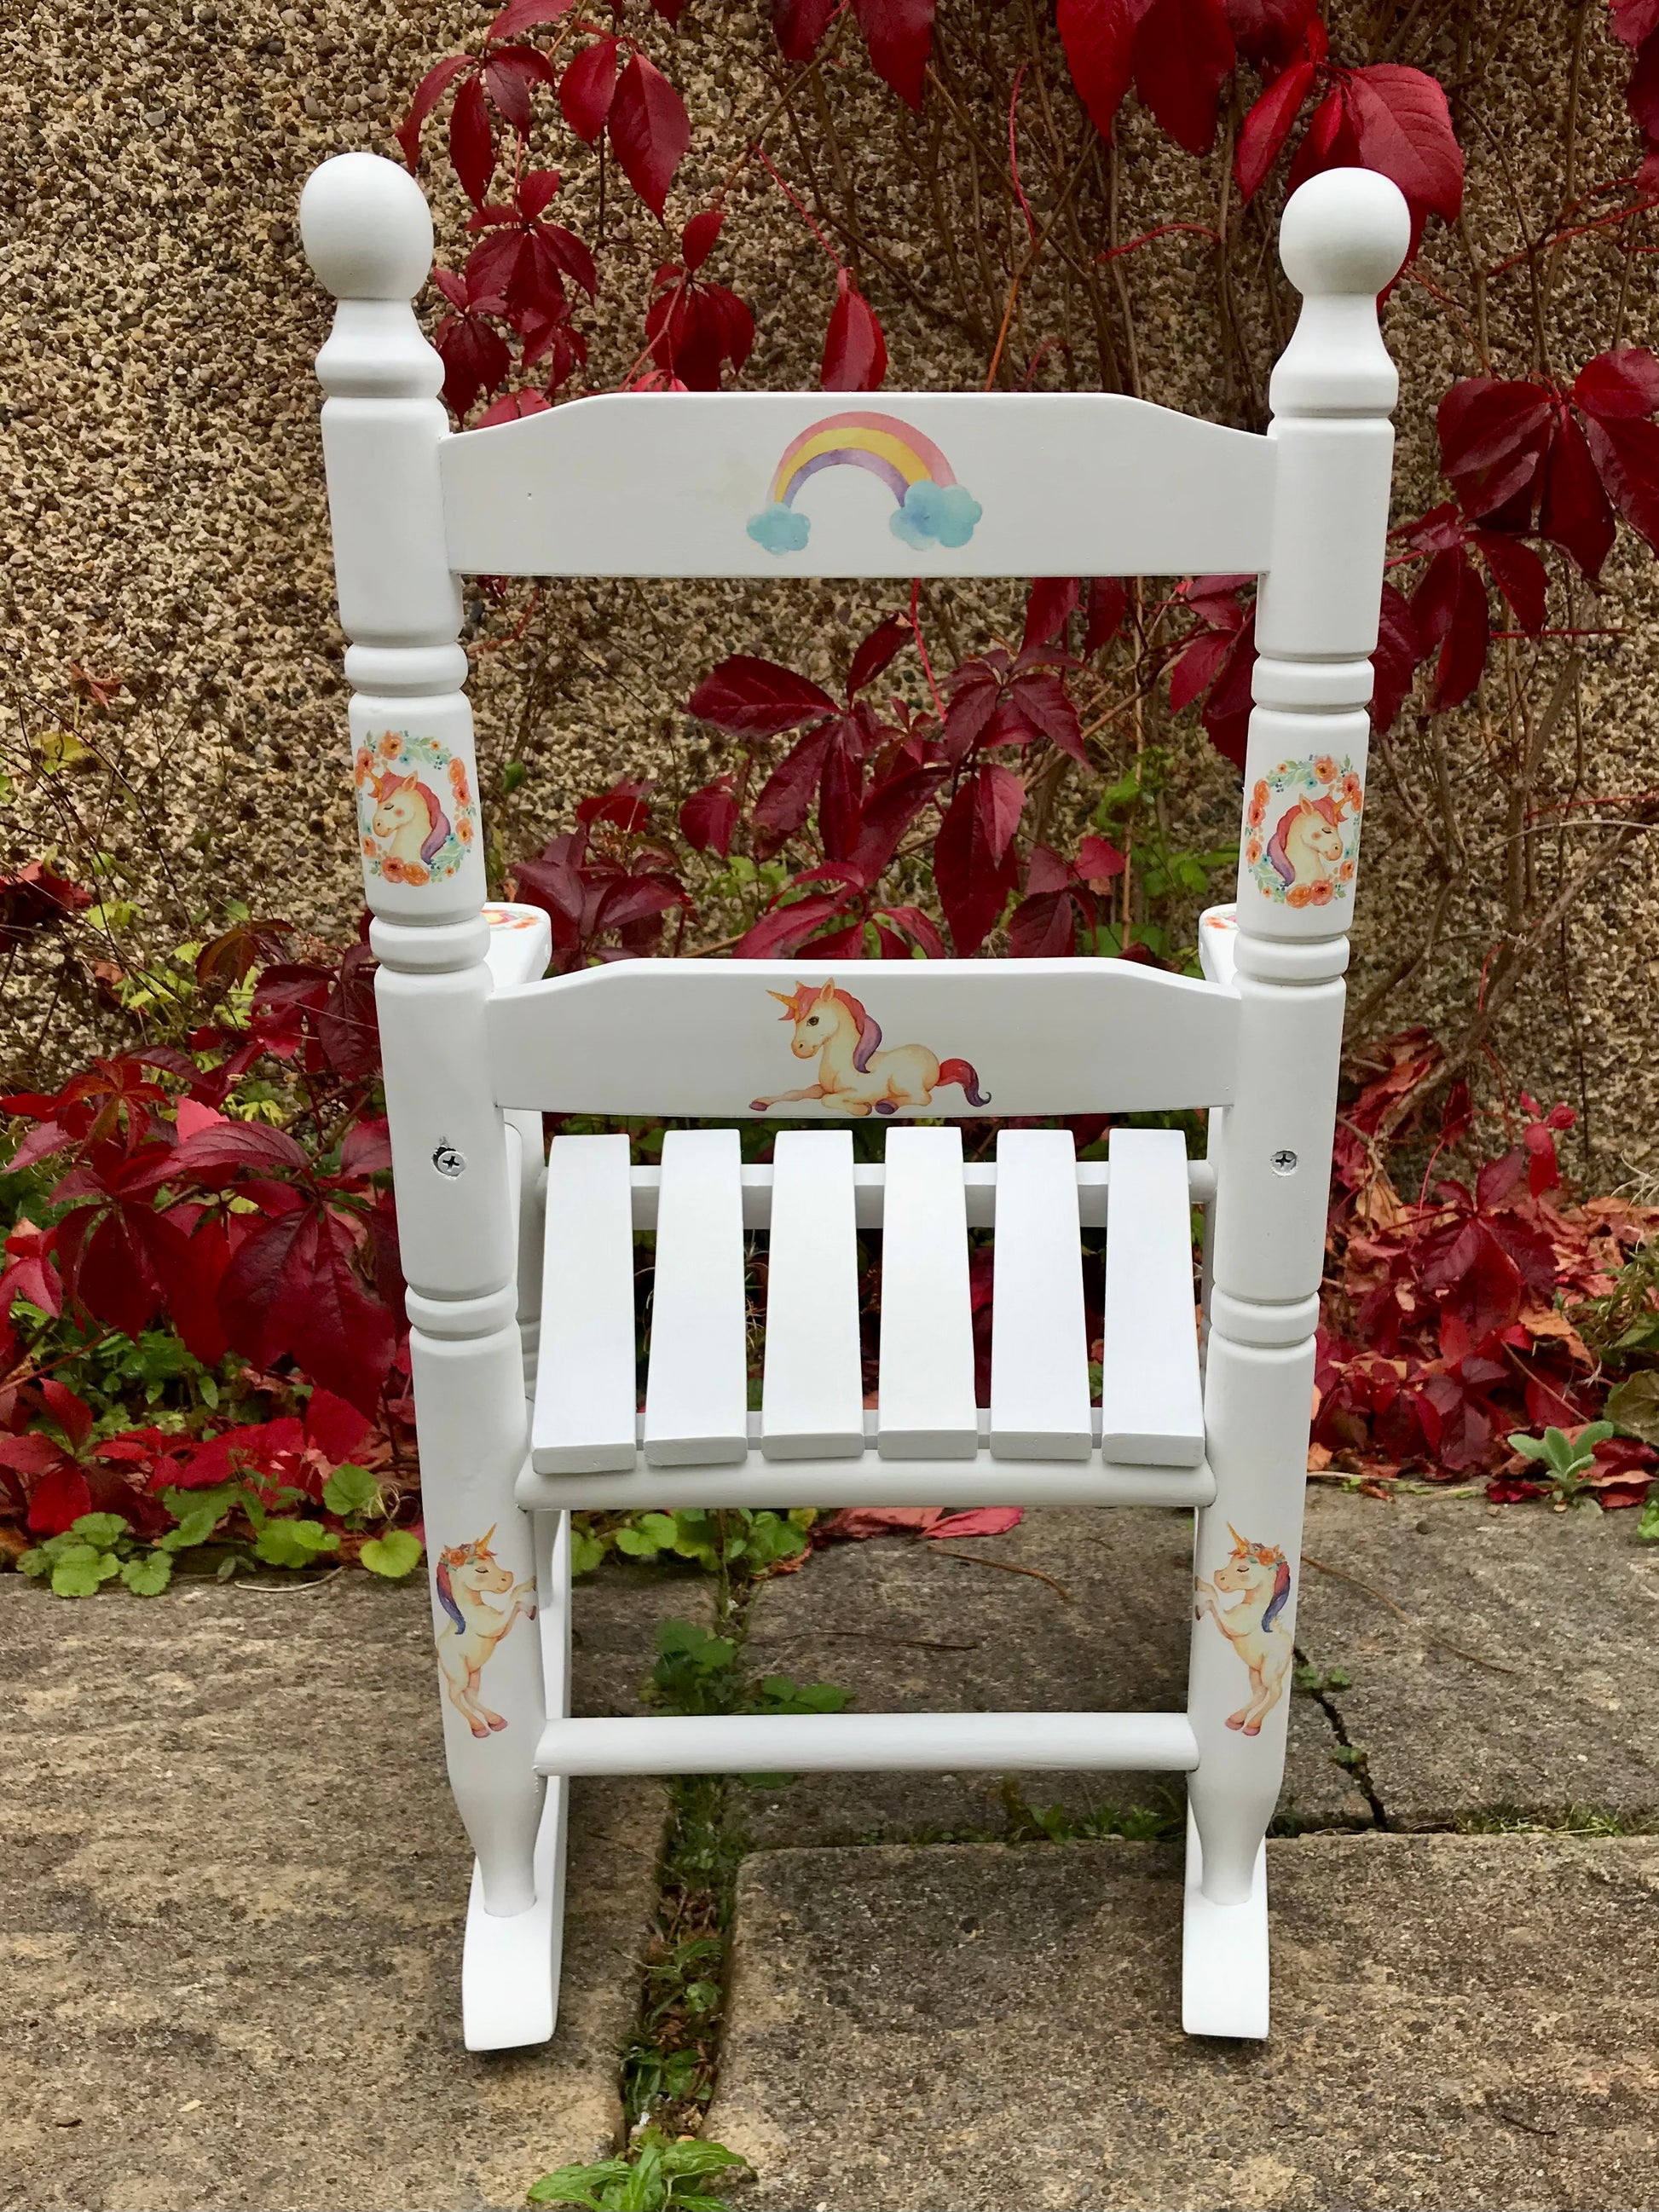 Personalised children's rocking chair - Unicorn theme - made to order